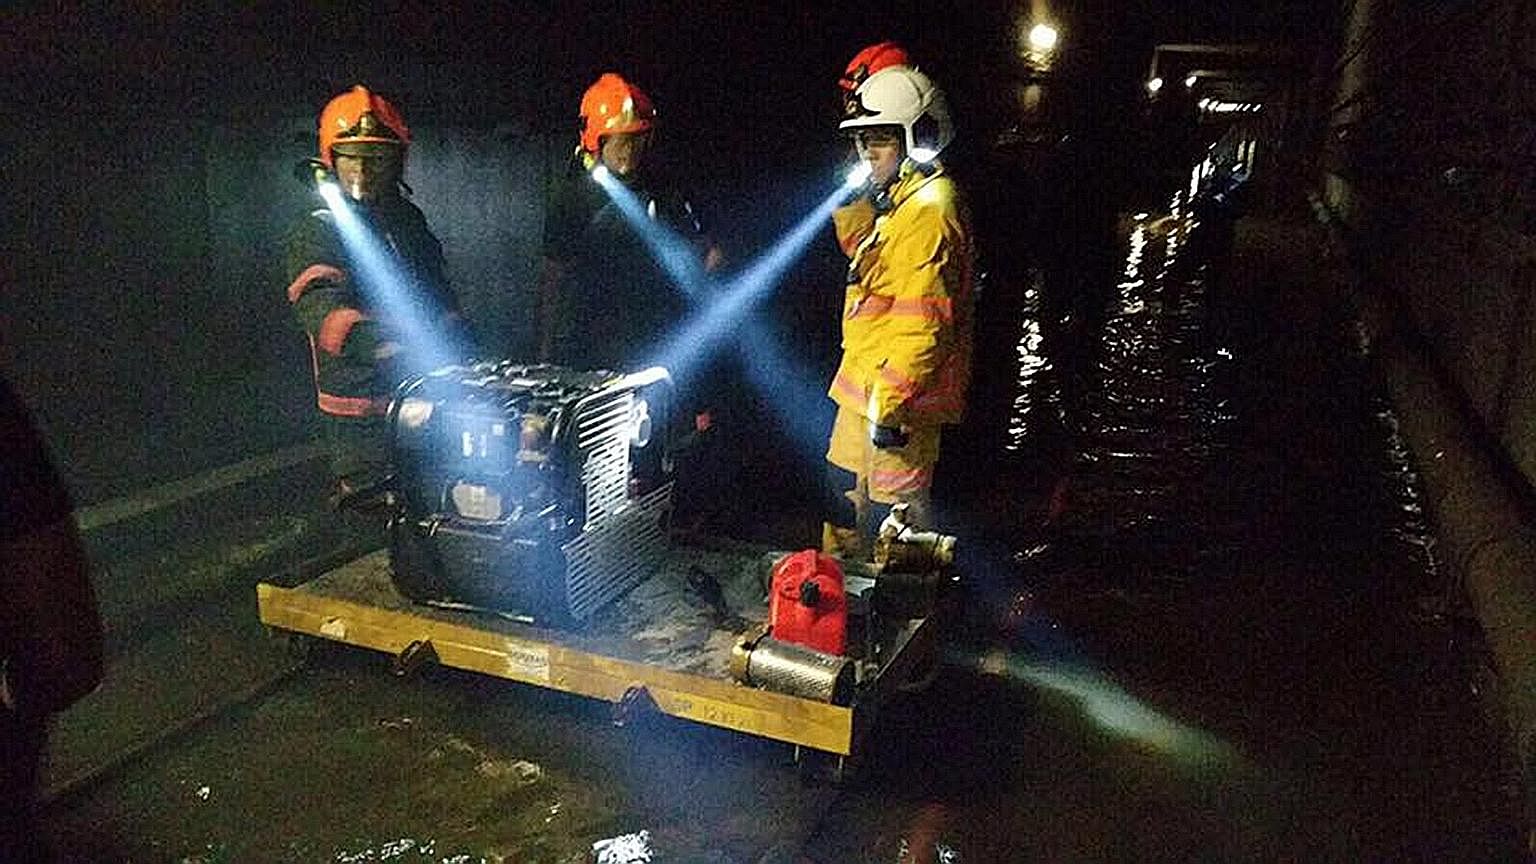 The Singapore Civil Defence Force, which received a call from SMRT about flooding in the tunnel between Braddell and Bishan MRT stations earlier this month, worked with the engineering teams from the Land Transport Authority, PUB and SMRT to pump out